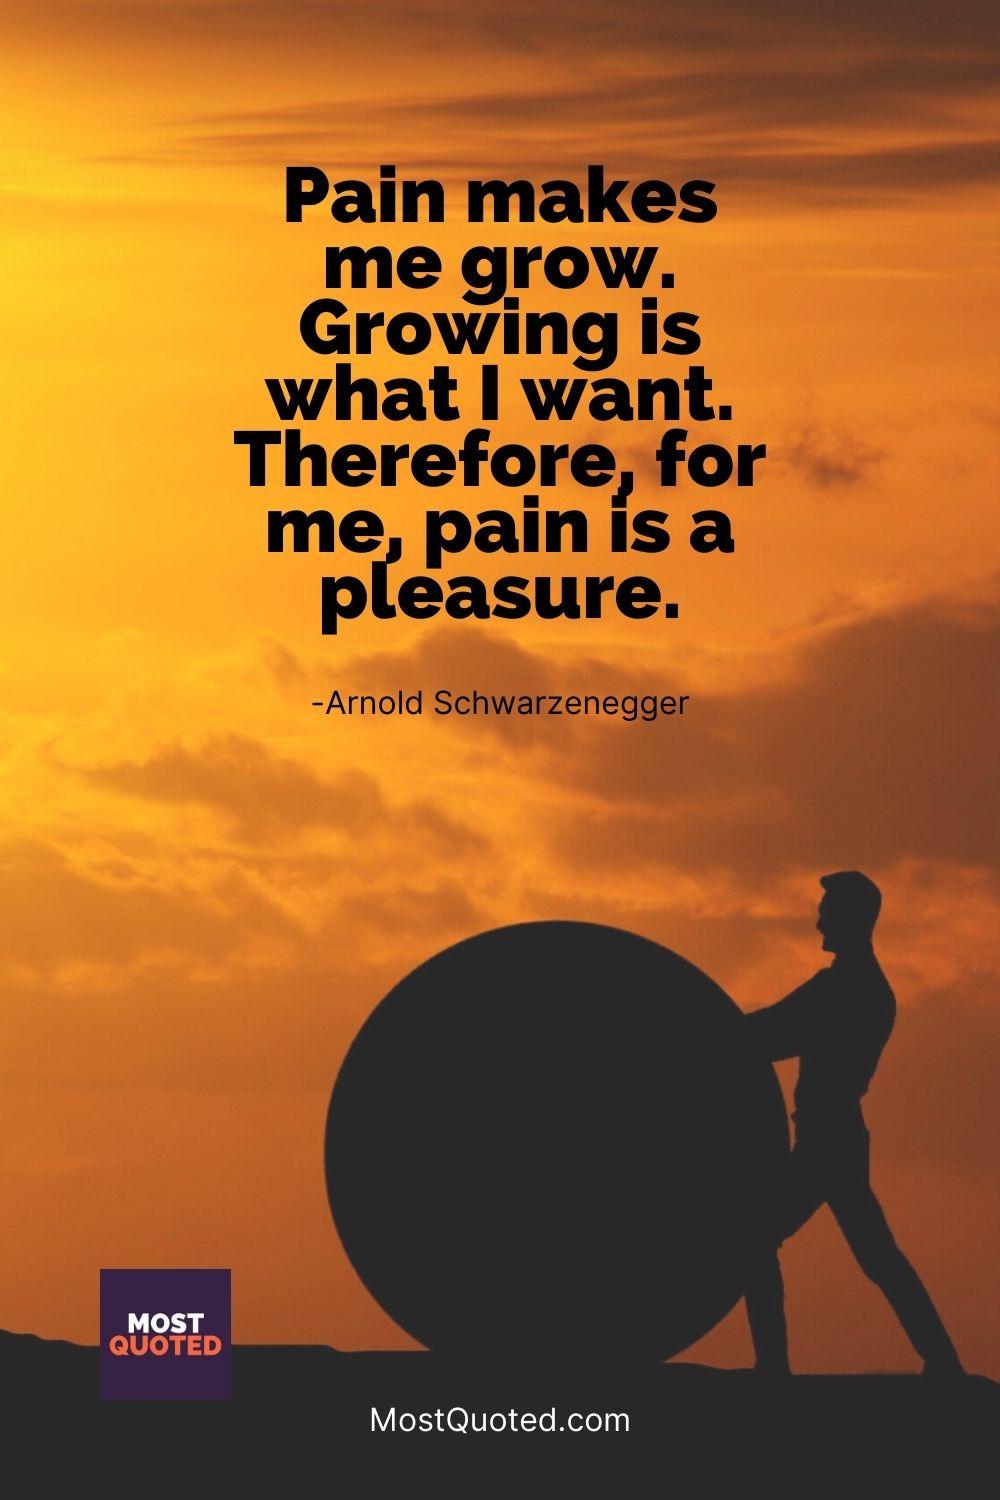 Pain makes me grow. Growing is what I want. Therefore, for me, pain is a pleasure. - Arnold Schwarzenegger